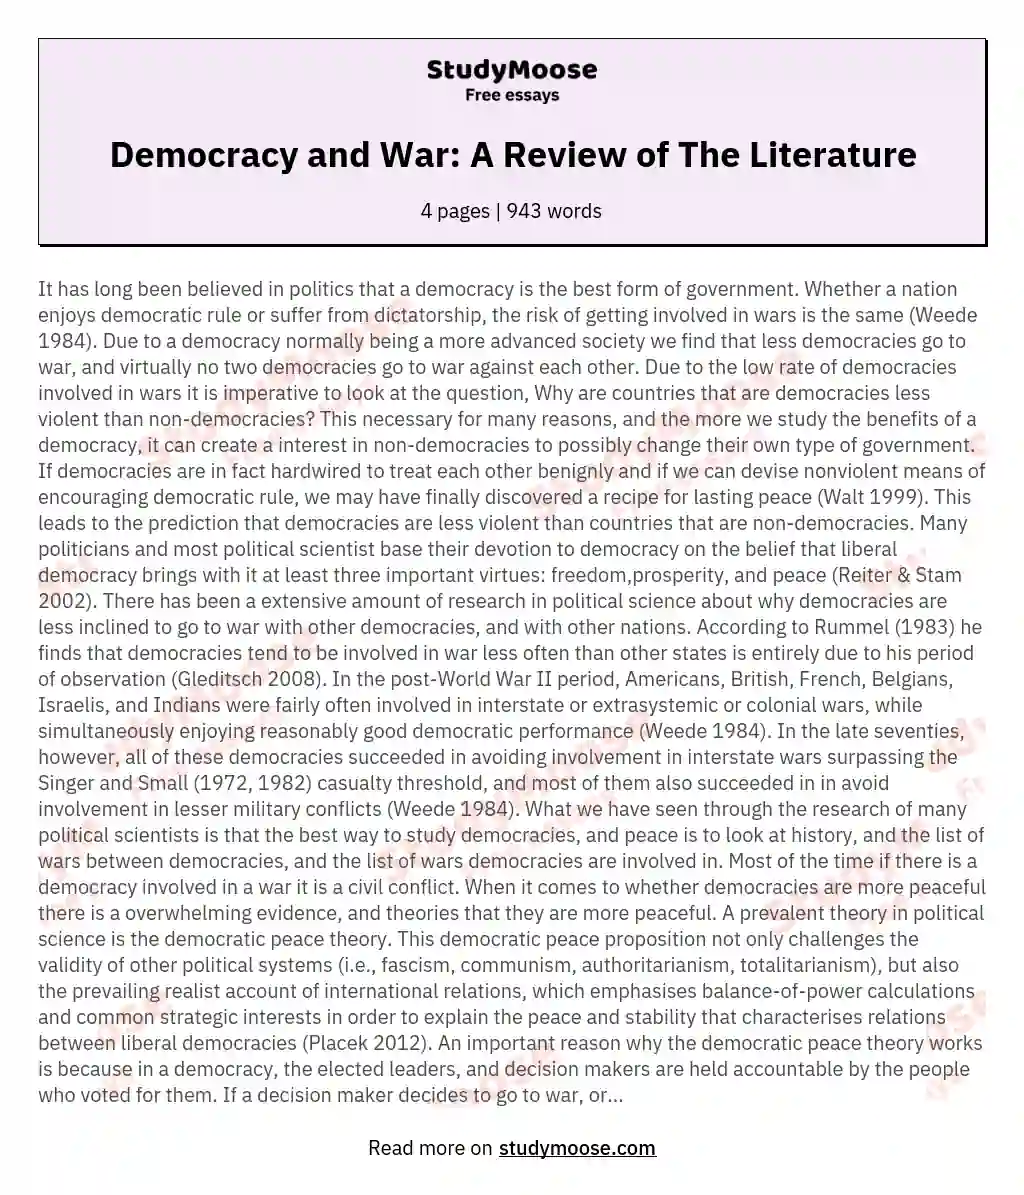 Democracy and War: A Review of The Literature essay